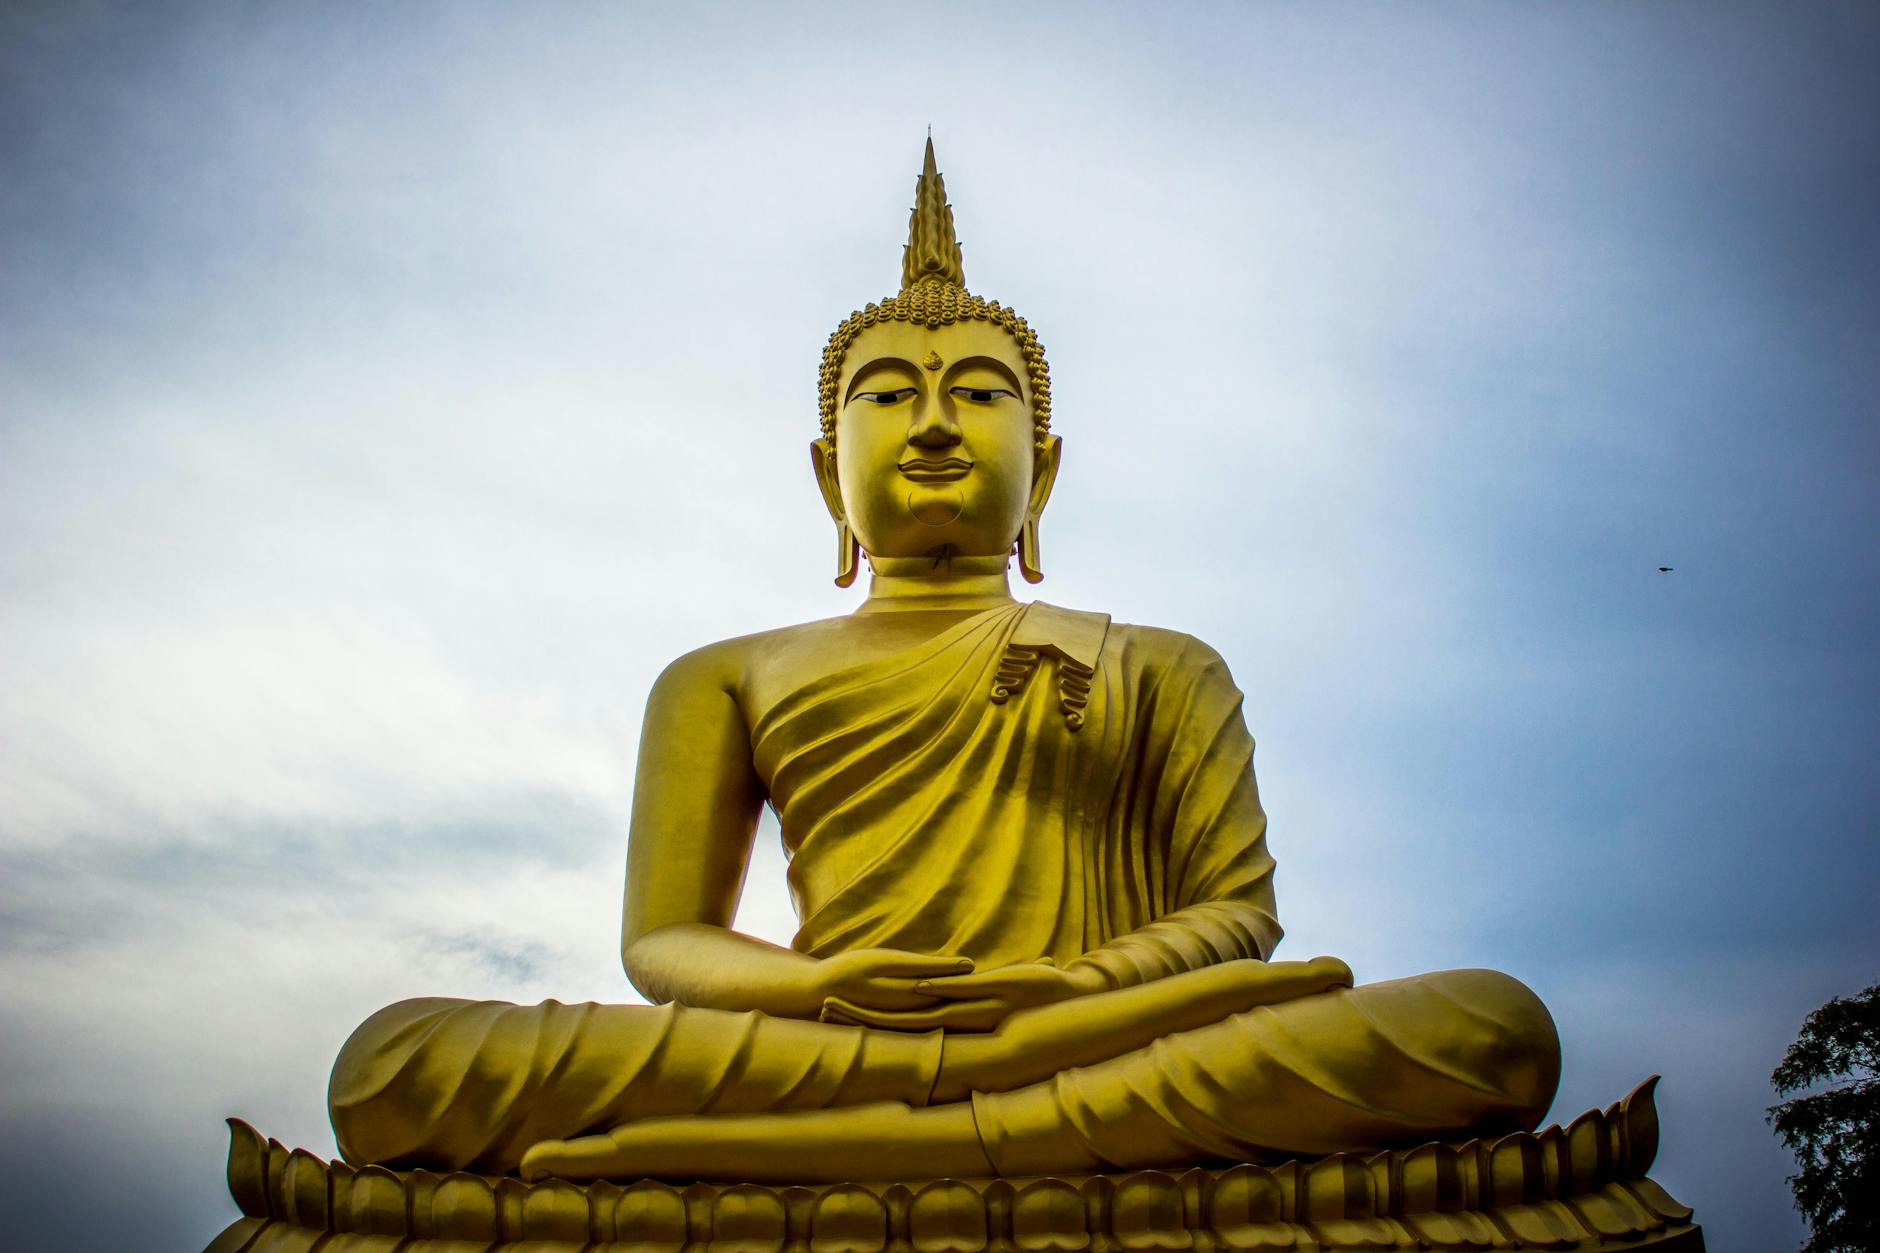 3 key teachings from Buddha that can help you find inner peace